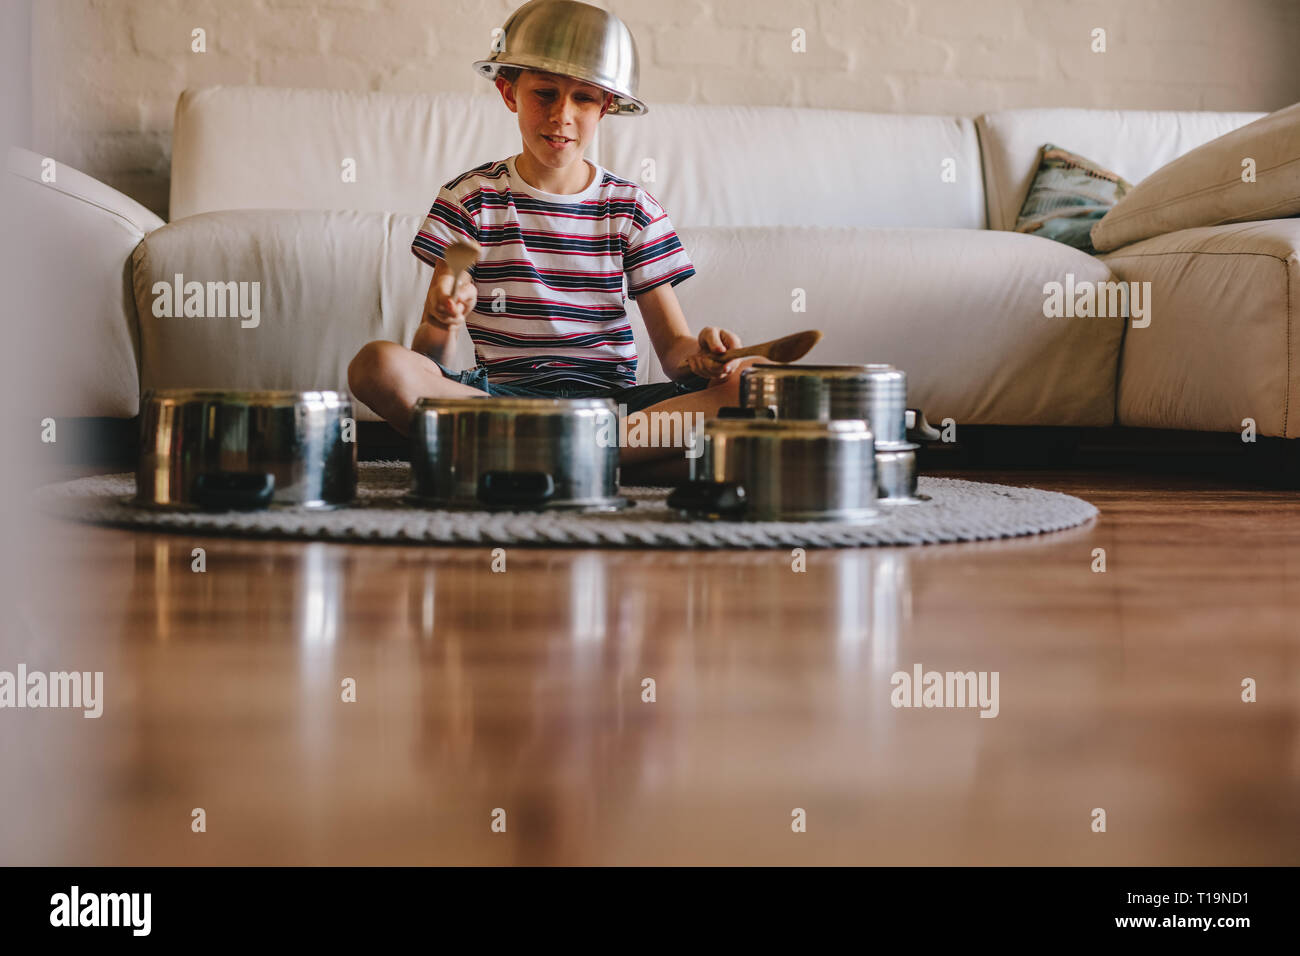 Little musician playing drums on kitchenware at home. Innocent boy pretending to be a drummer sitting on the living room floor and playing on utensils Stock Photo